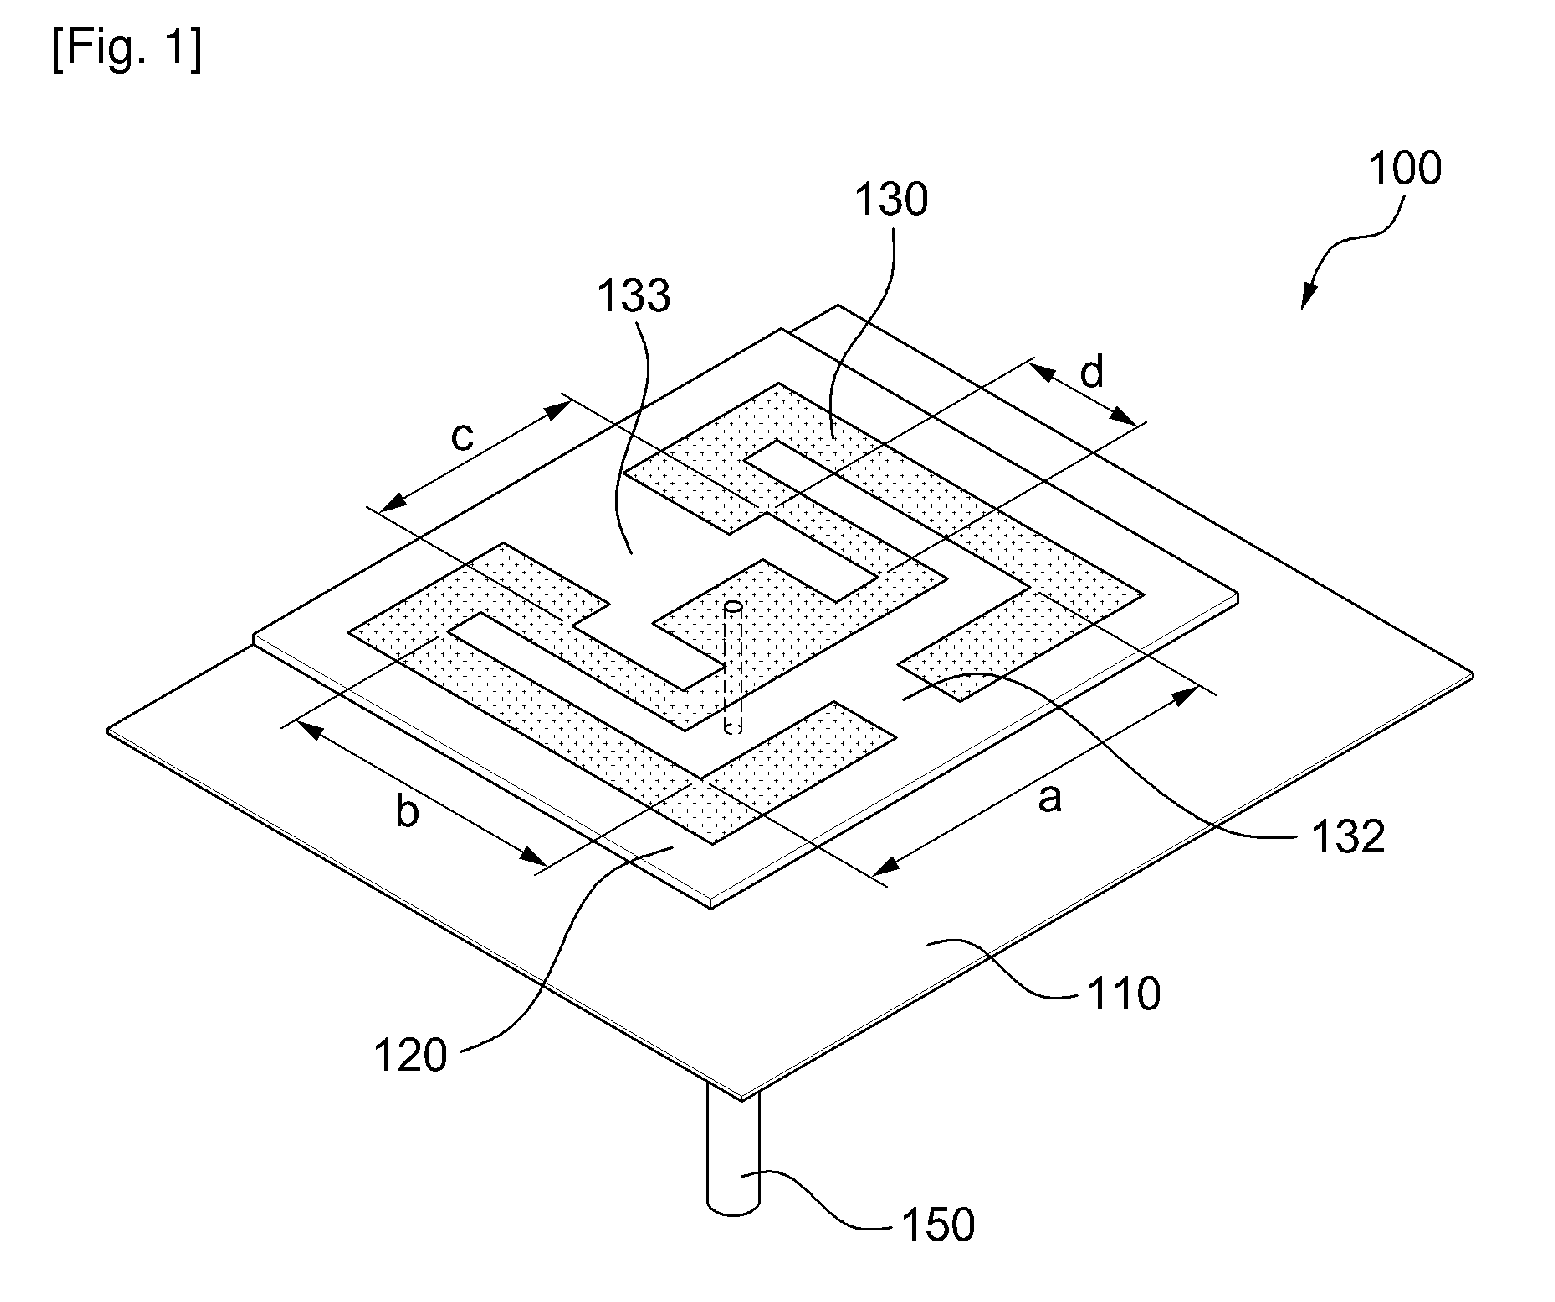 Microstrip antenna comprised of two slots